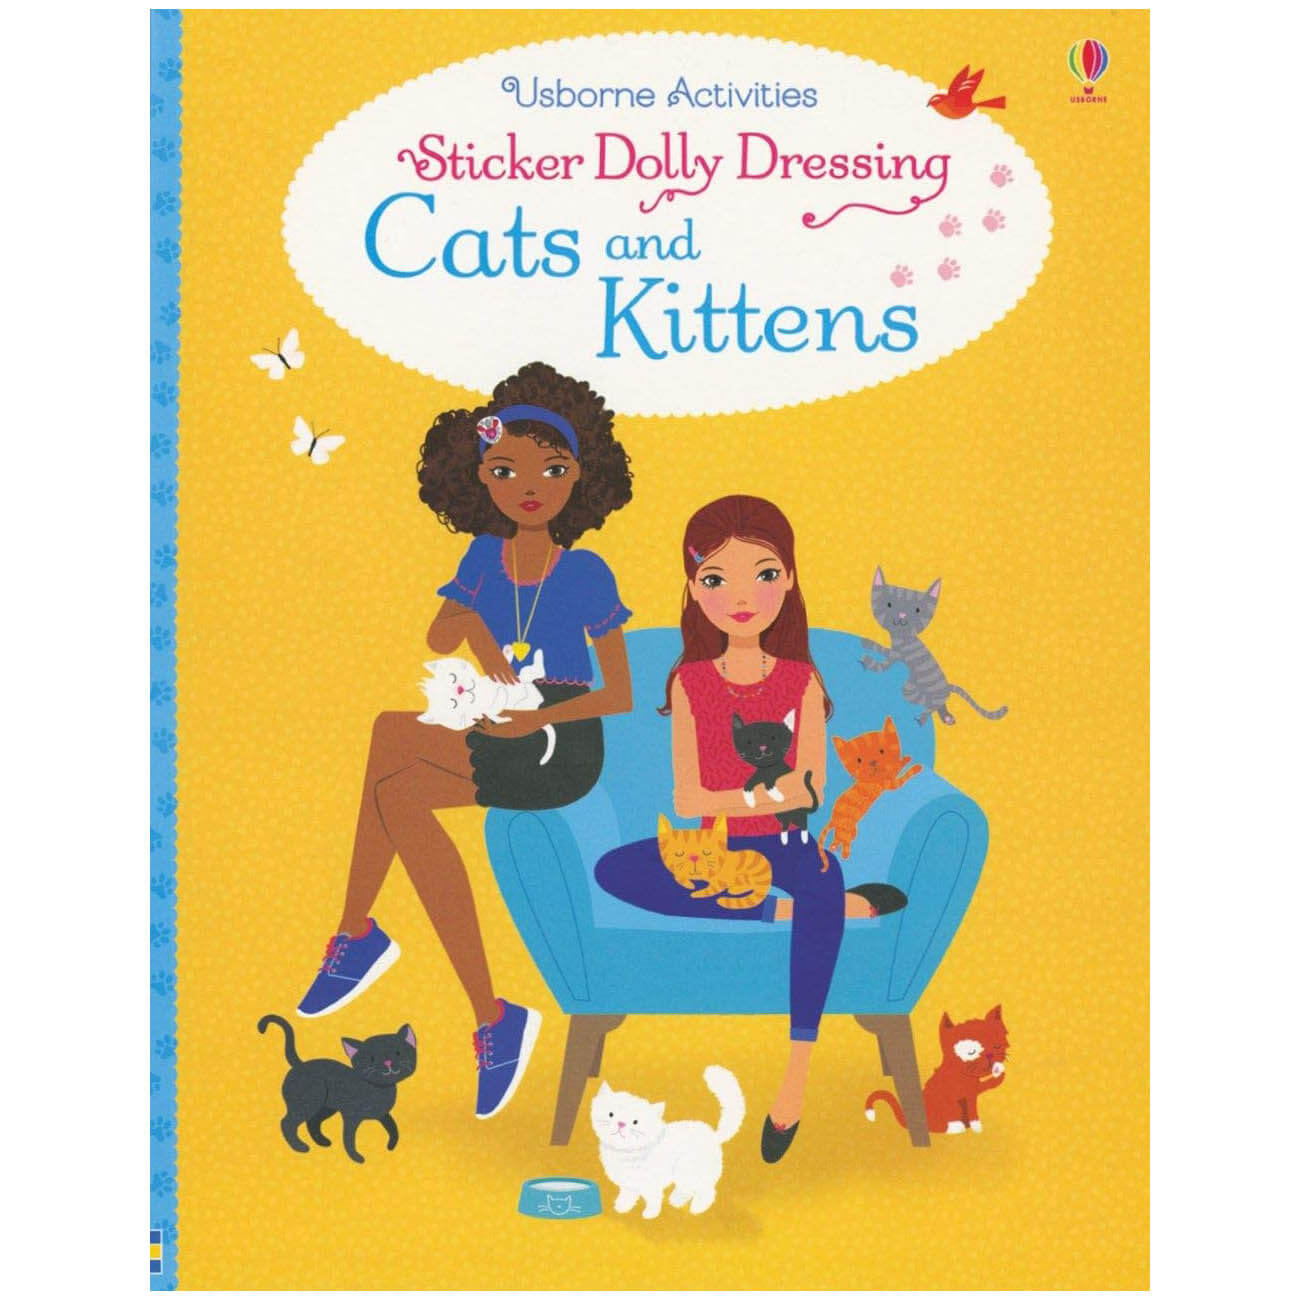 Usborne Sticker Dolly Dressing Cats and Kittens